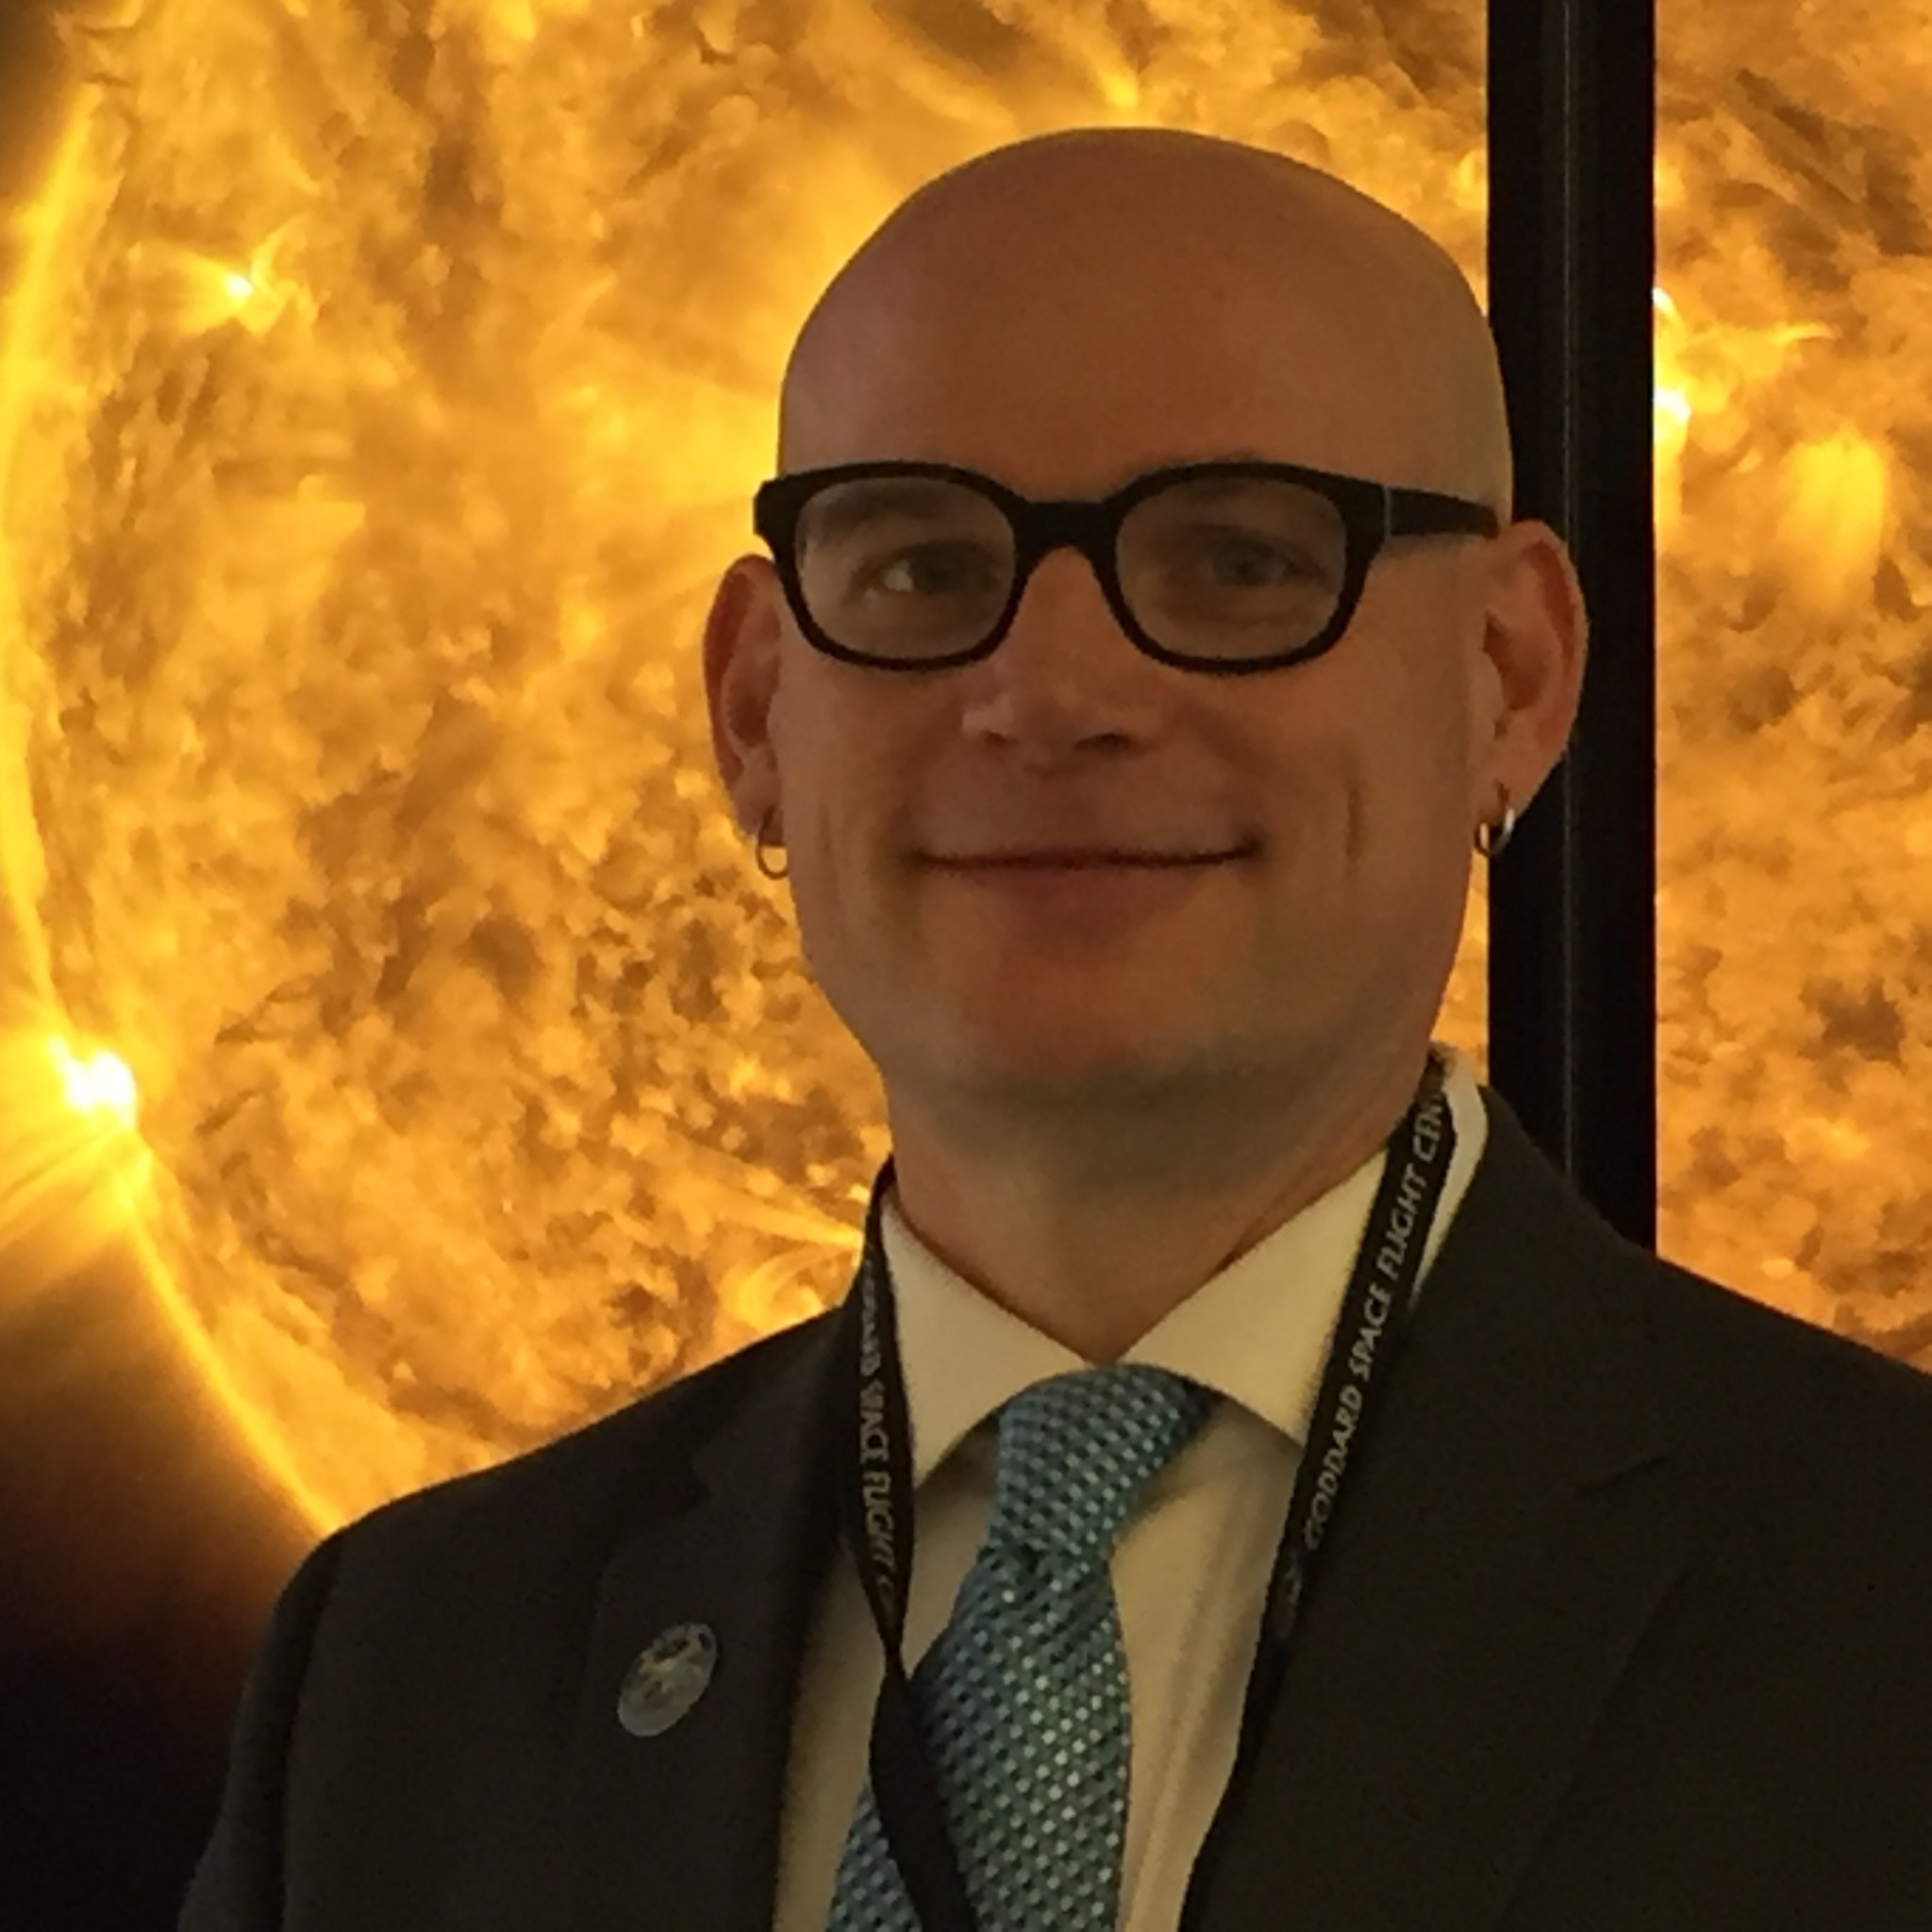 portrait in front of image of sun